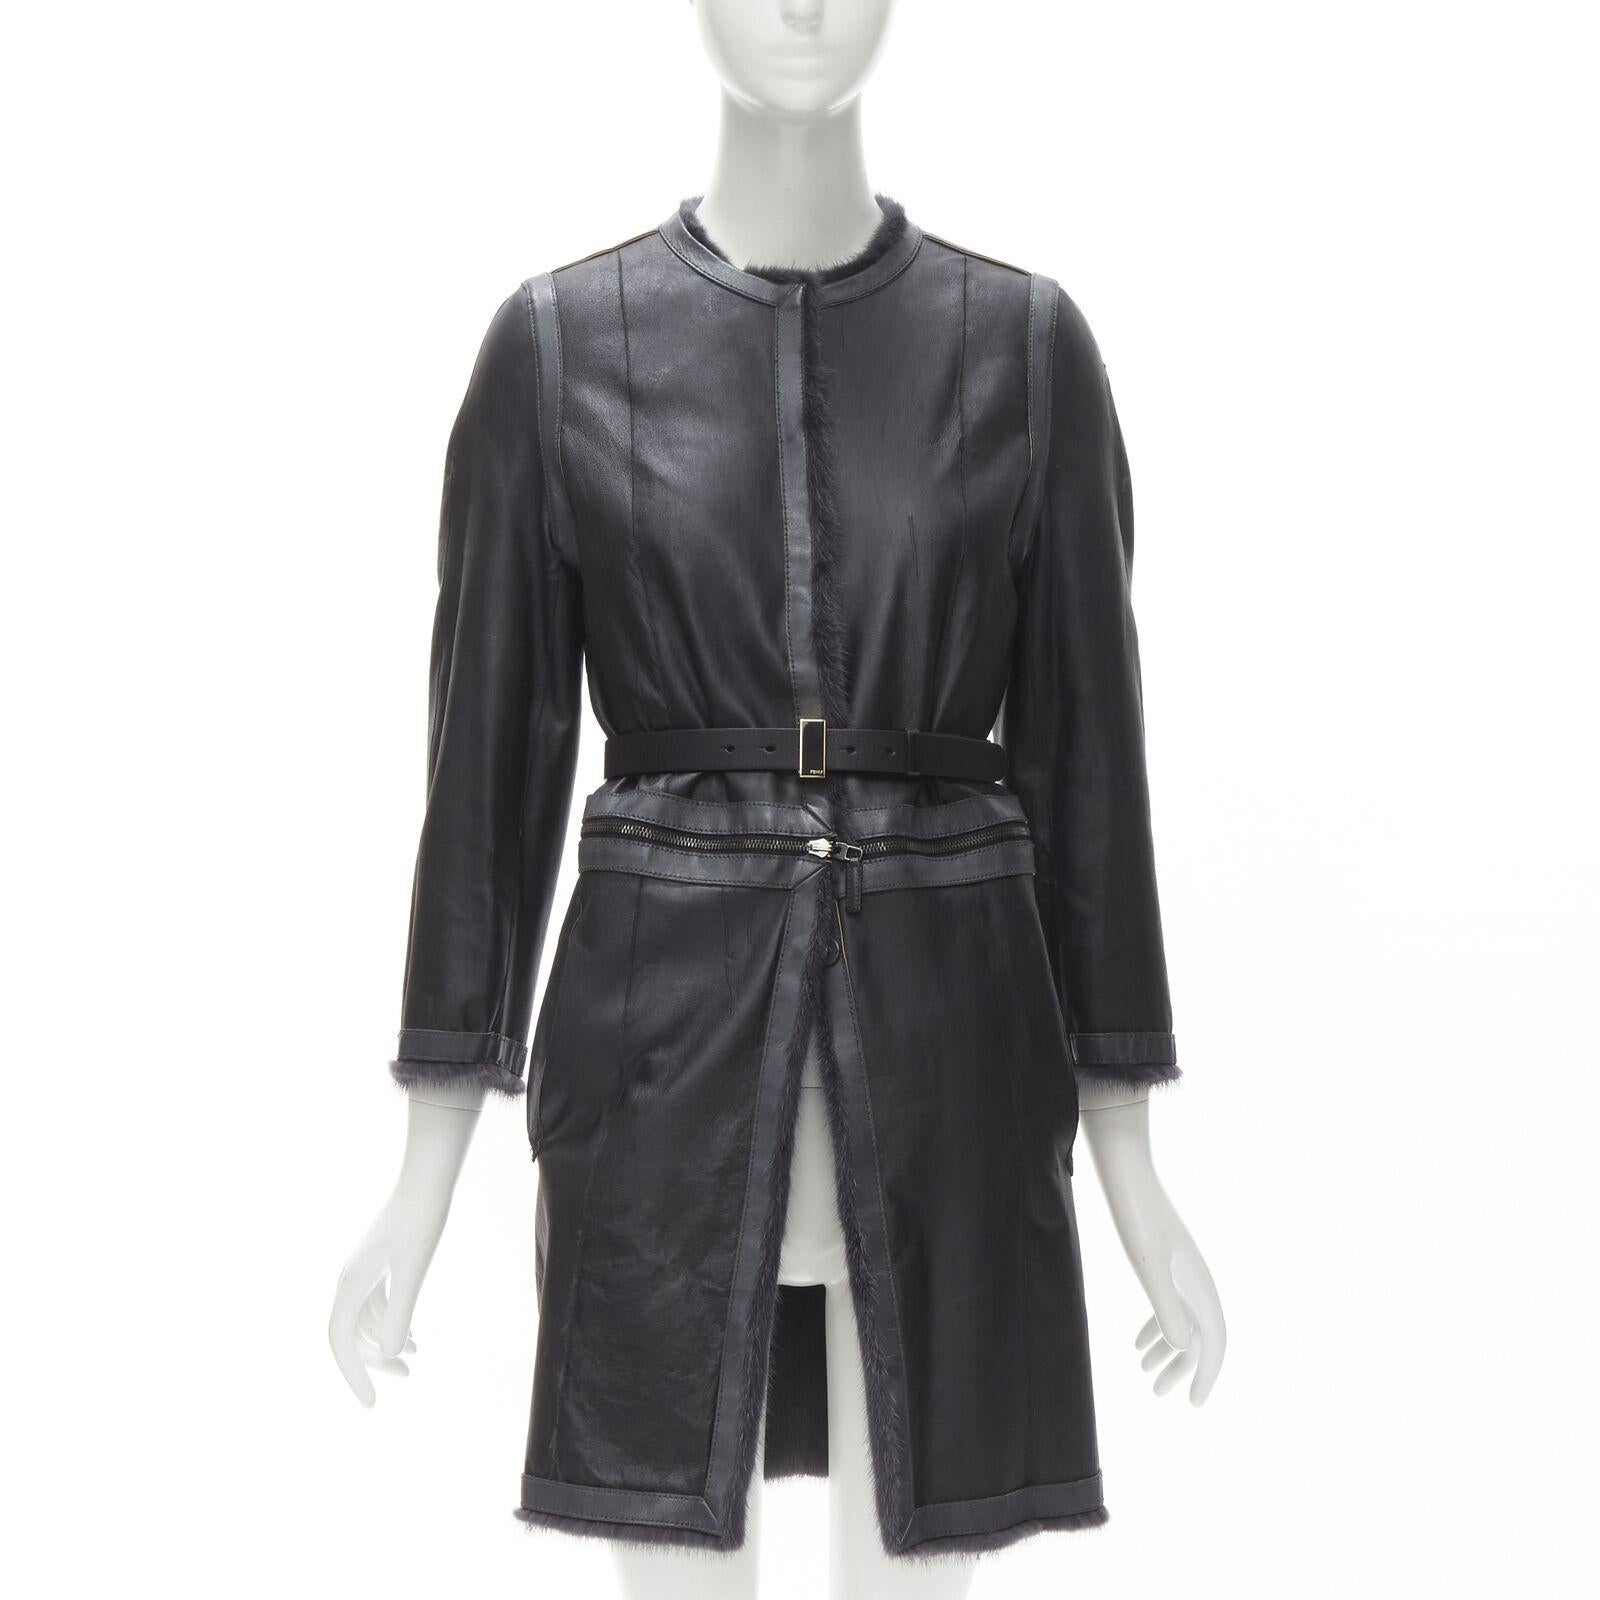 FENDI grey black fur leather 4-way reversible zip belted coat jacket IT38
Reference: KNLM/A00076
Brand: Fendi
Material: Fur, Leather
Color: Black, Grey
Pattern: Solid
Closure: Snap Buttons
Lining: Leather
Extra Details: Leather snap buttons.